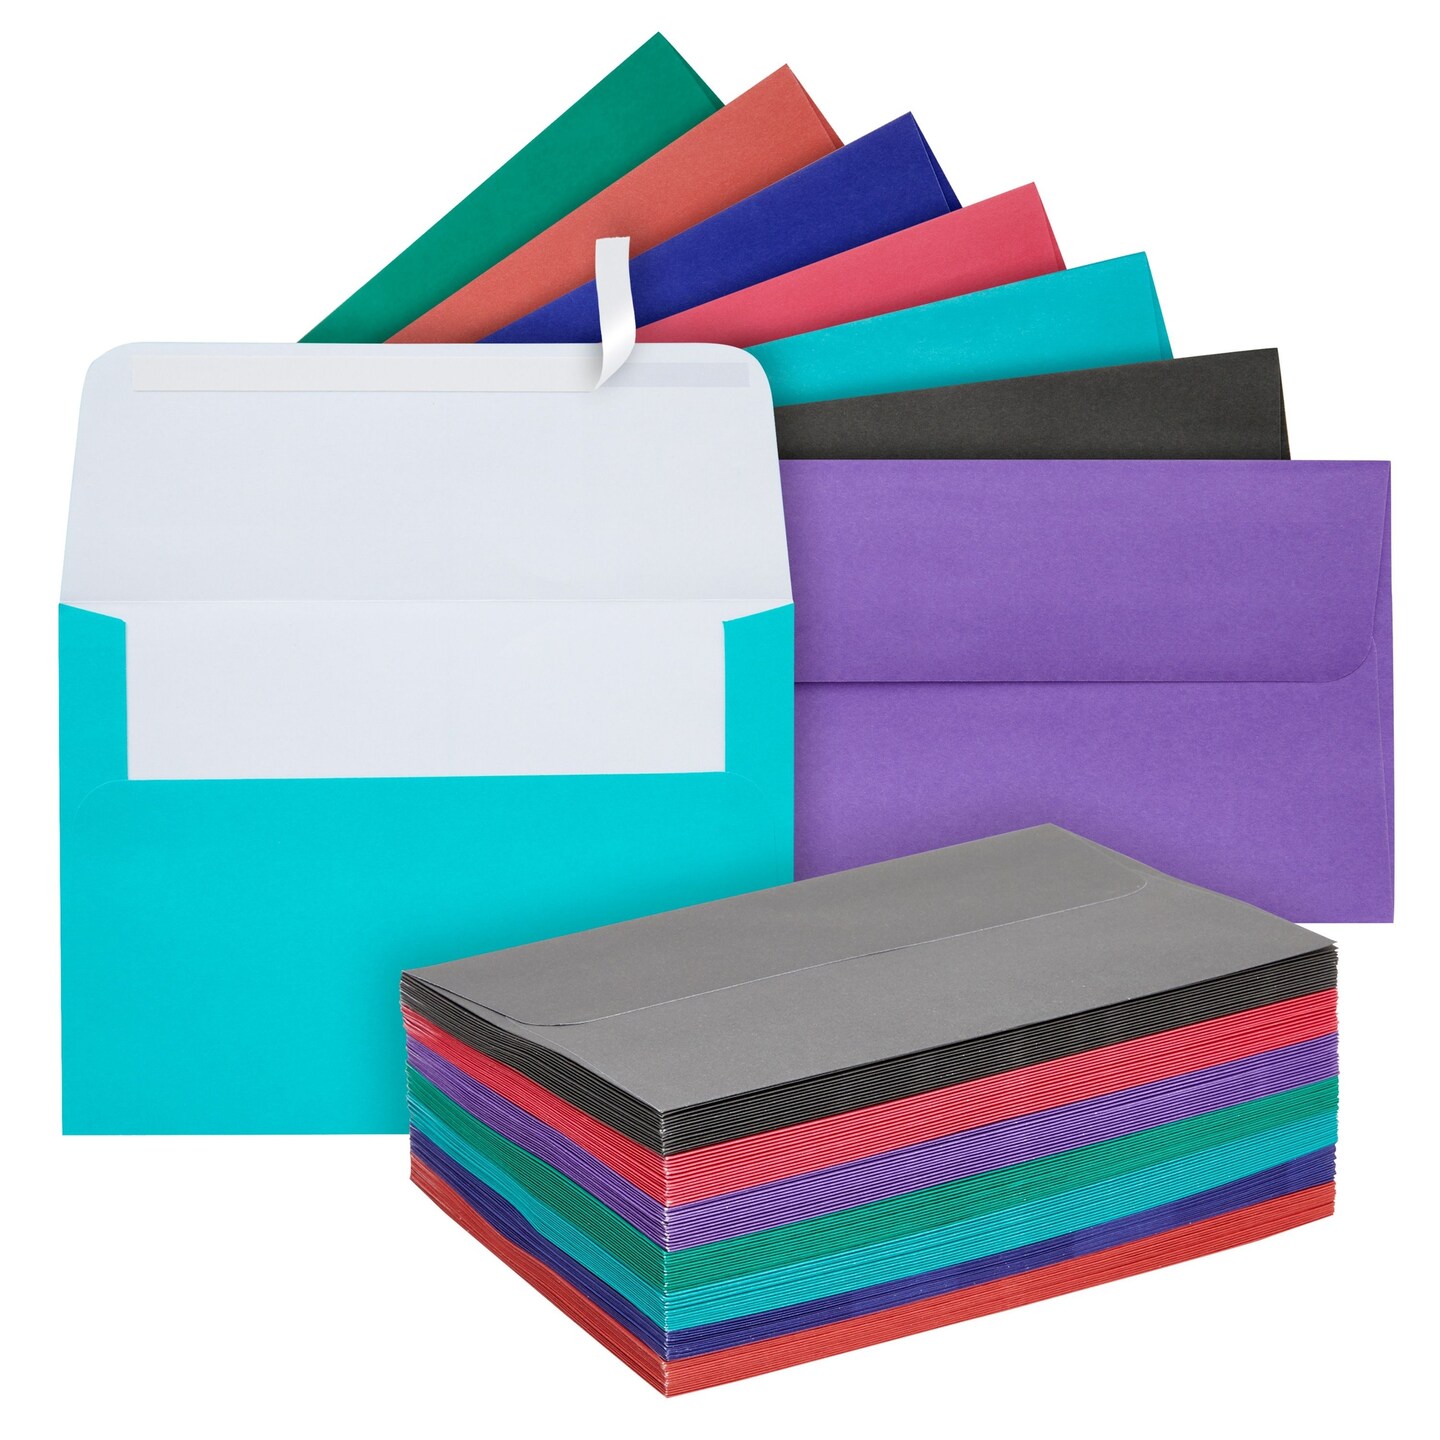 100 Pack Colored 4x6 Envelopes for Invitations, Birthday Cards, Wedding,  Photos, Self-Adhesive Peel and Stick (A6, 7 Colors)